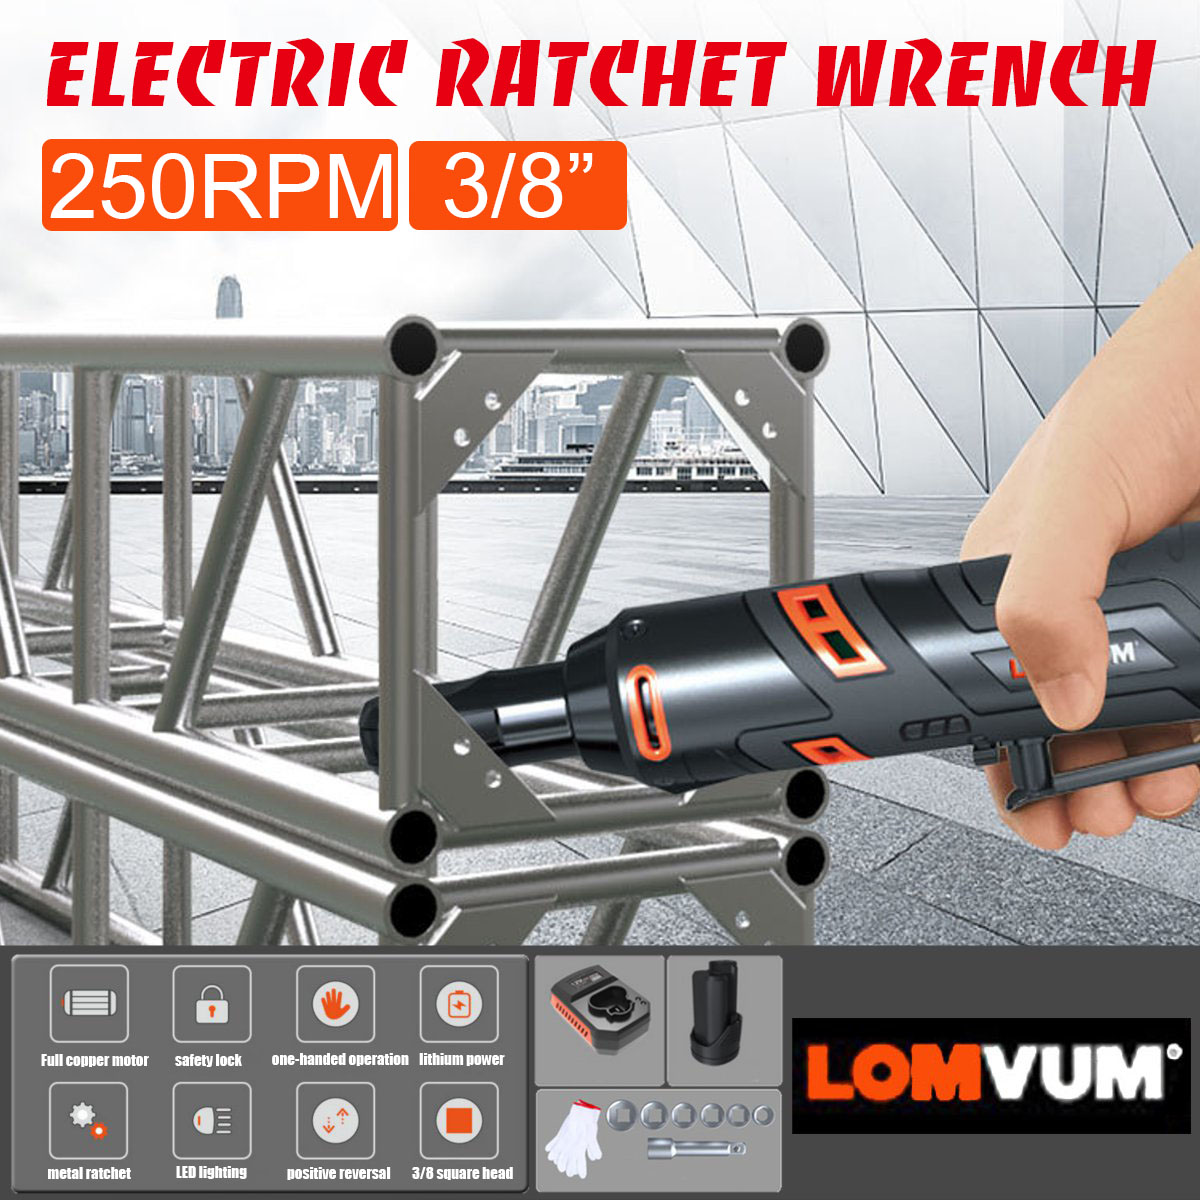 Power-Cordless-Ratchet-Wrench-Toolkit-38Inch-60NM-12V-Electric-Ratchet-Wrench-Right-Angle-With-Batte-1529794-3